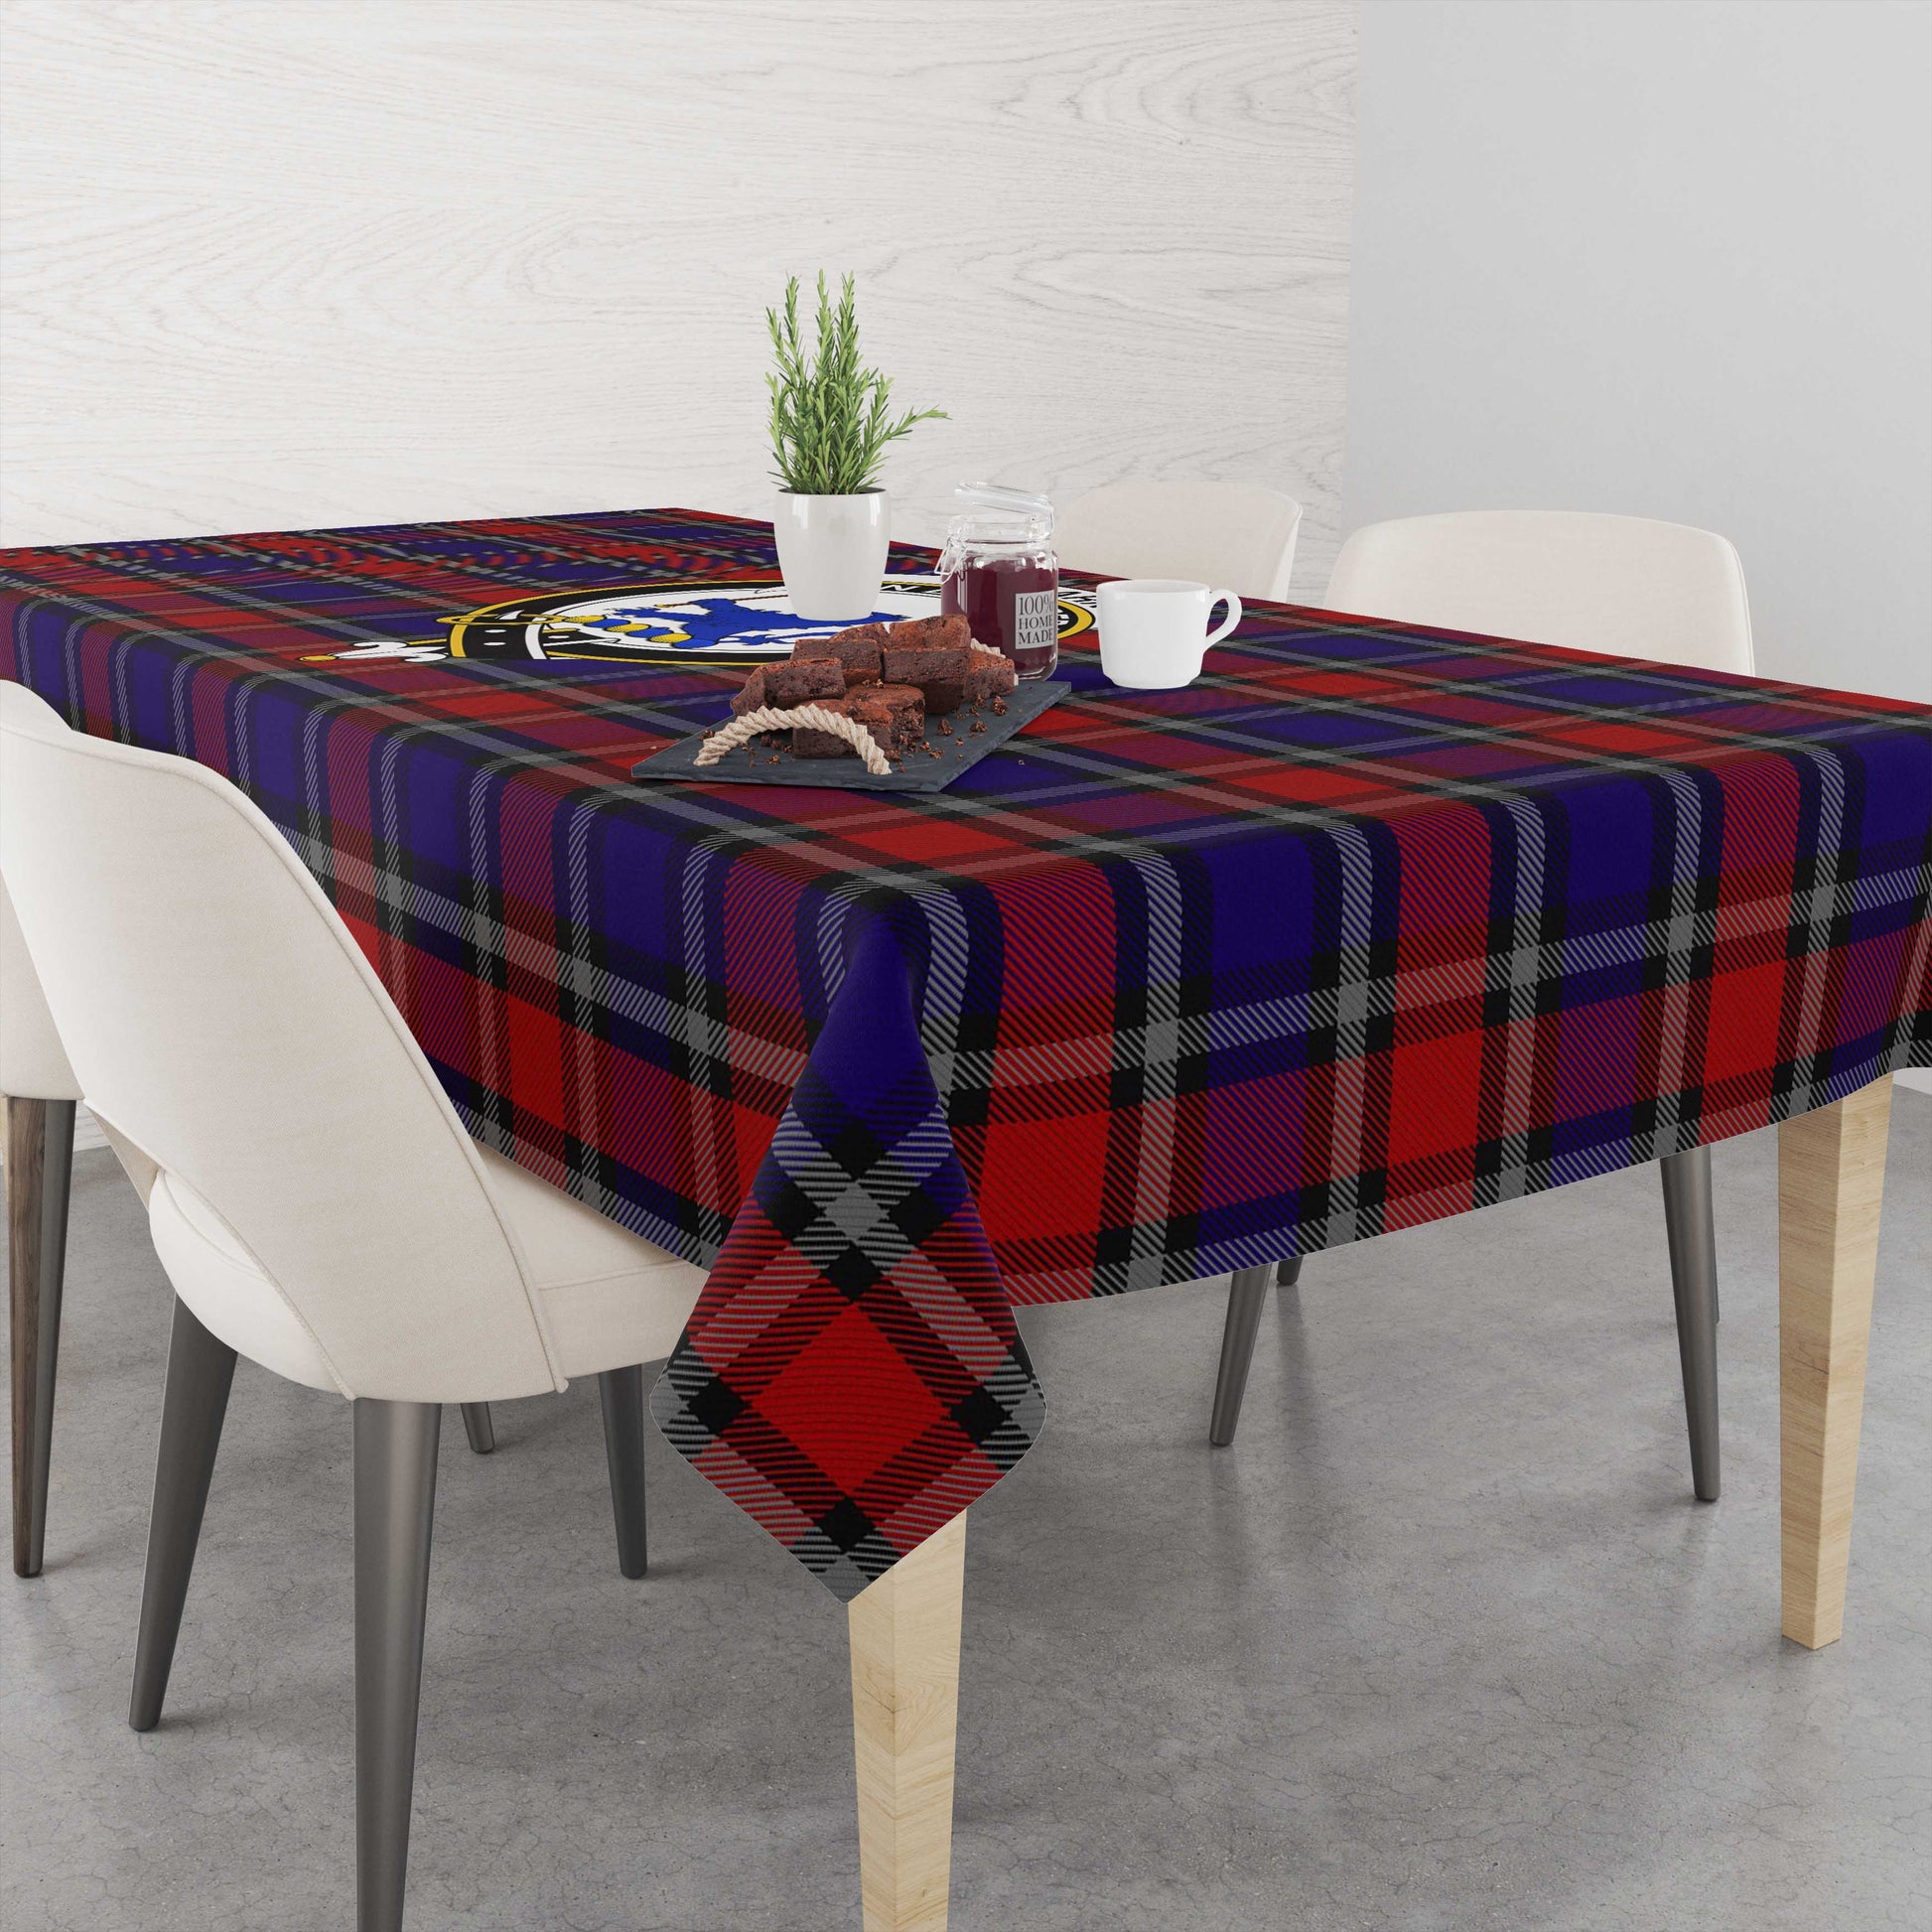 clark-lion-red-tatan-tablecloth-with-family-crest